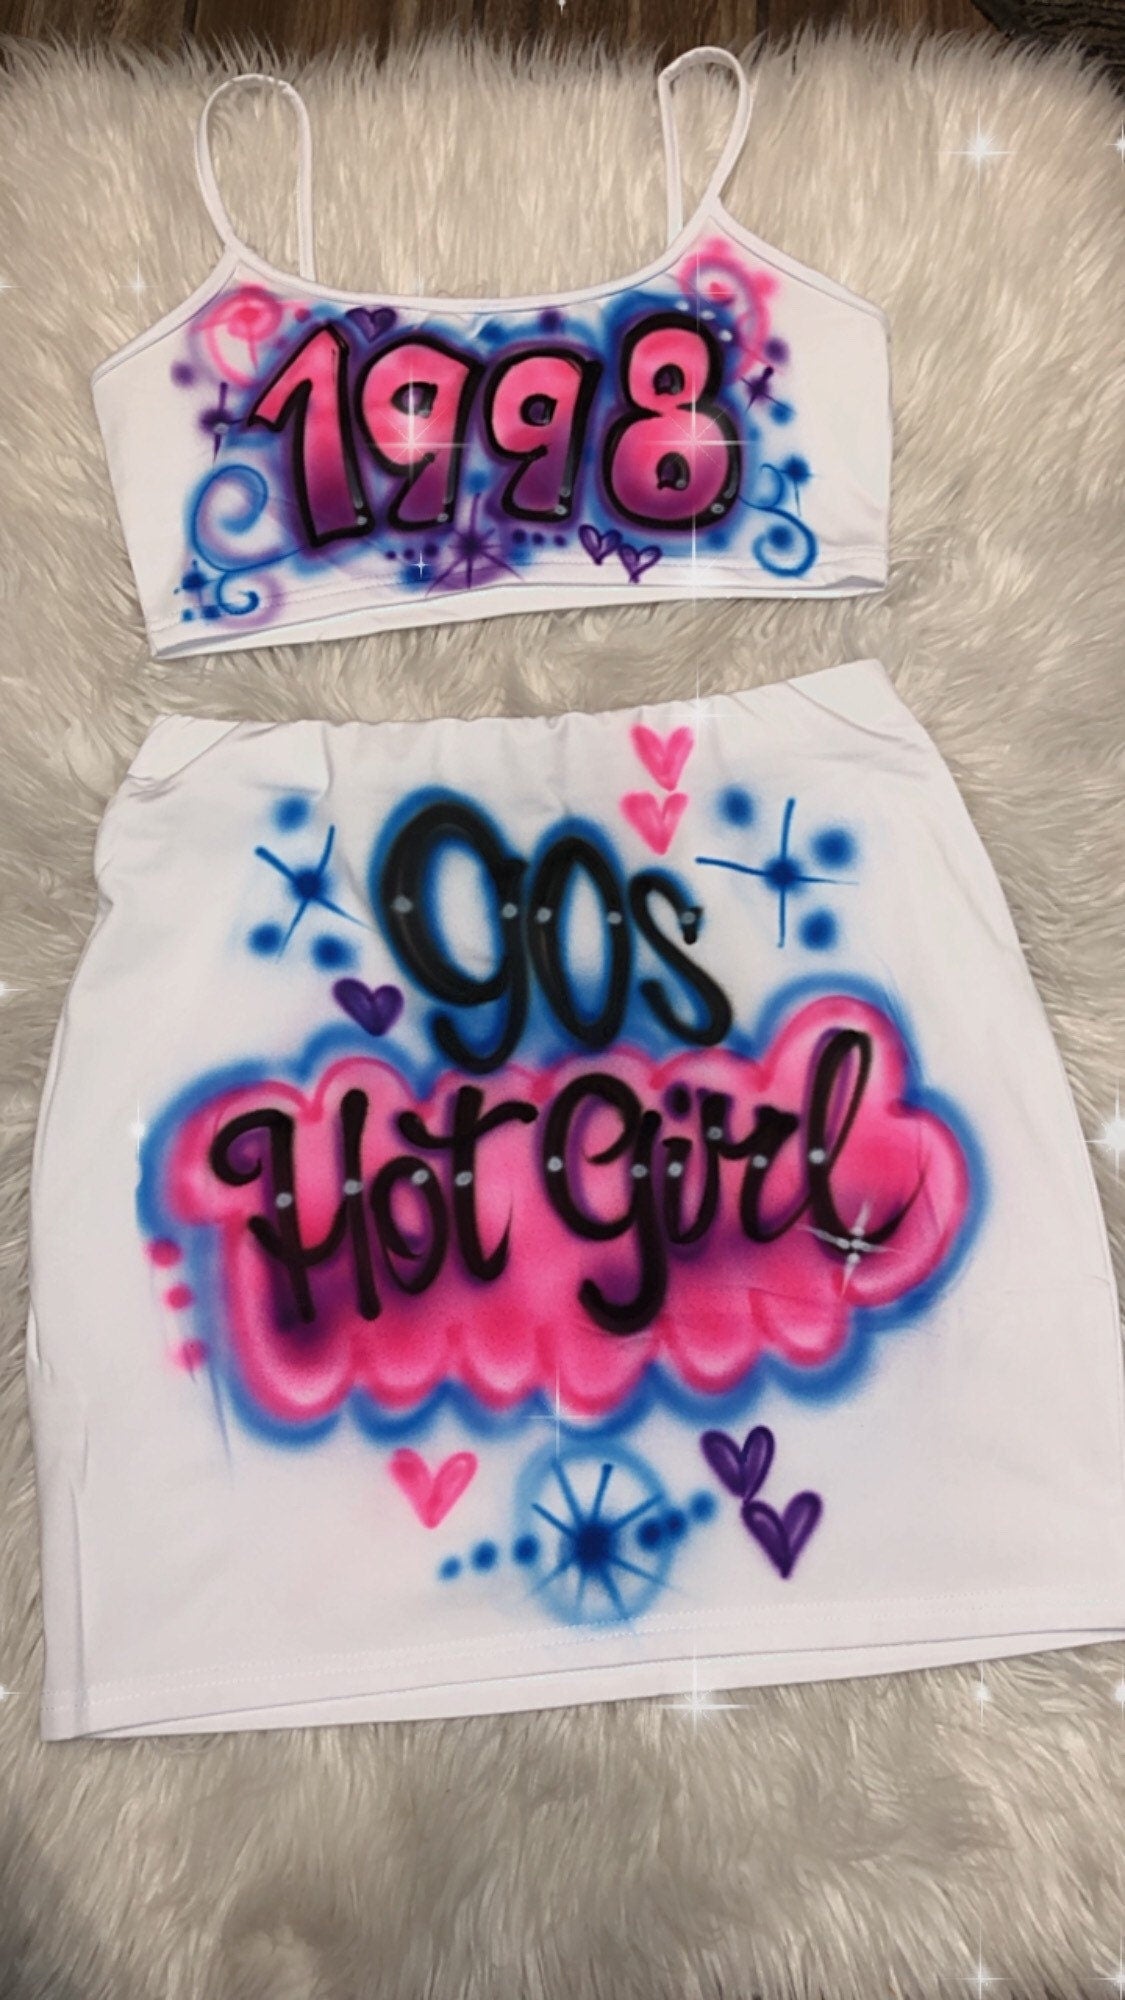 Airbrush Jeans Name Art for Your Overalls Jacket Skirt Shorts